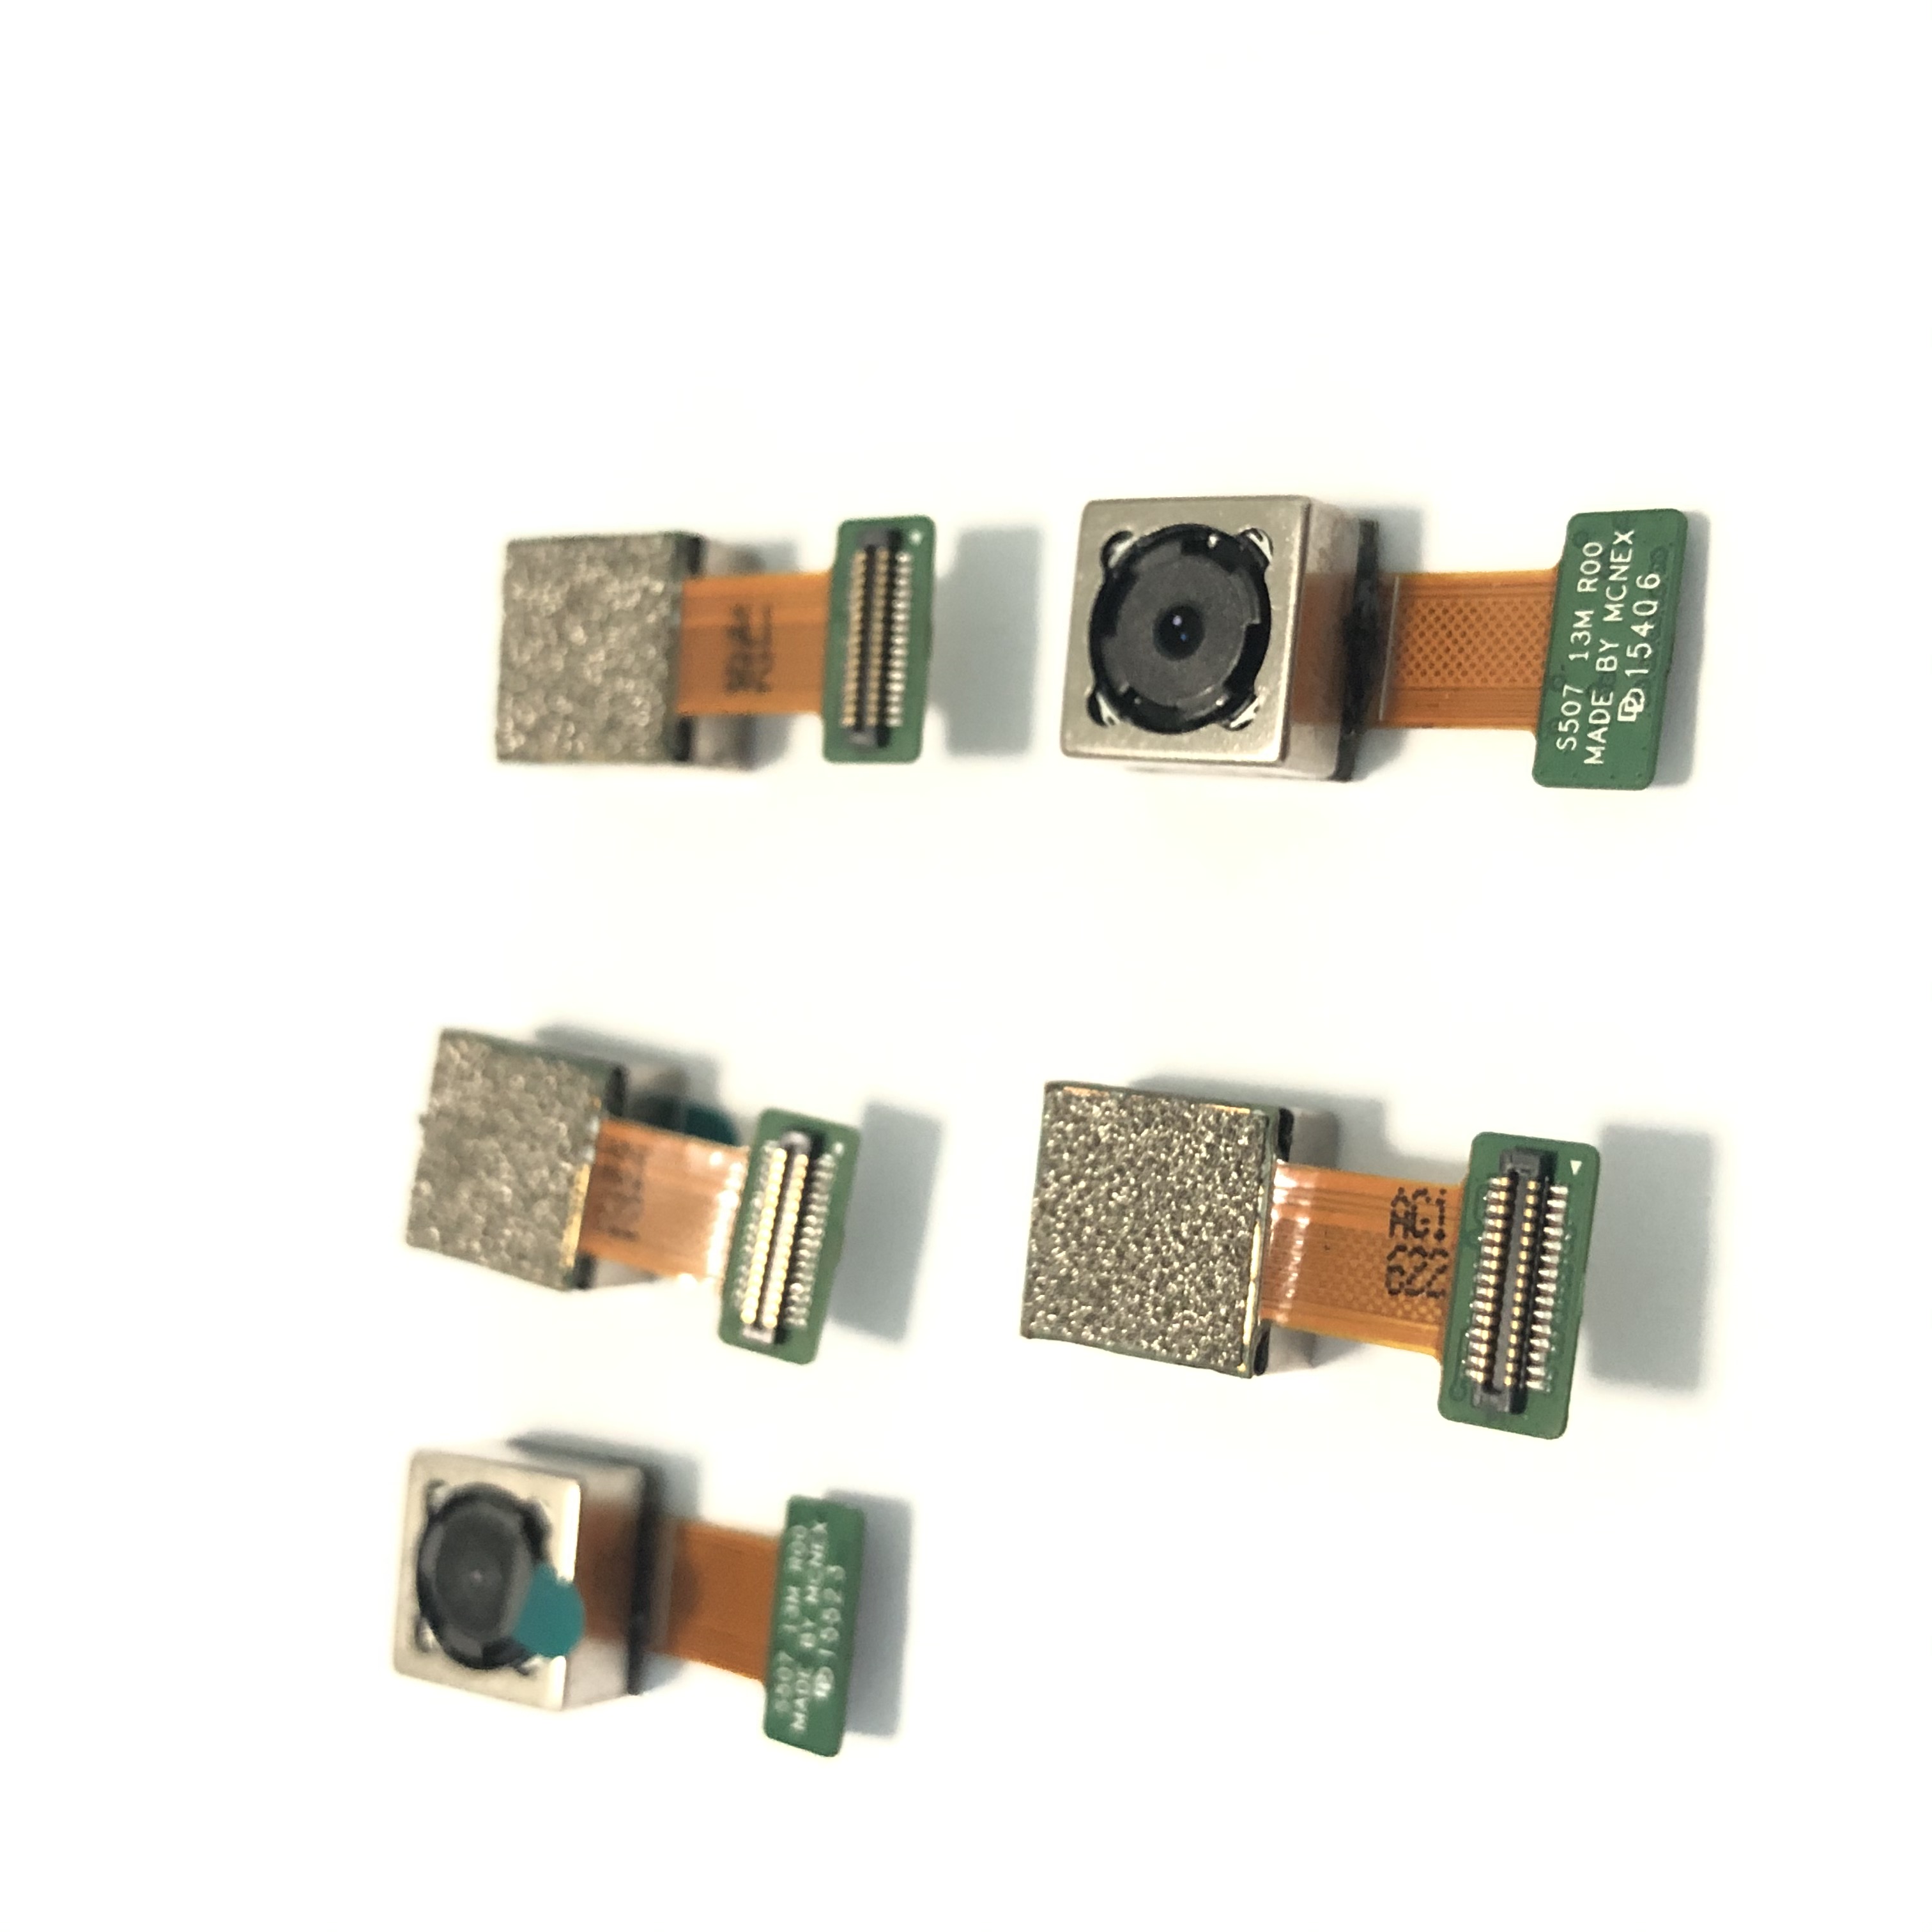 Factory wholesale Fpc Camera Module – Support customization GC0308 OV9712 OV9732 OV9655 OV9650 OV9653 OV9750 OV2710 OV2715 8MP/ 4K Zoom camera module – Ronghua